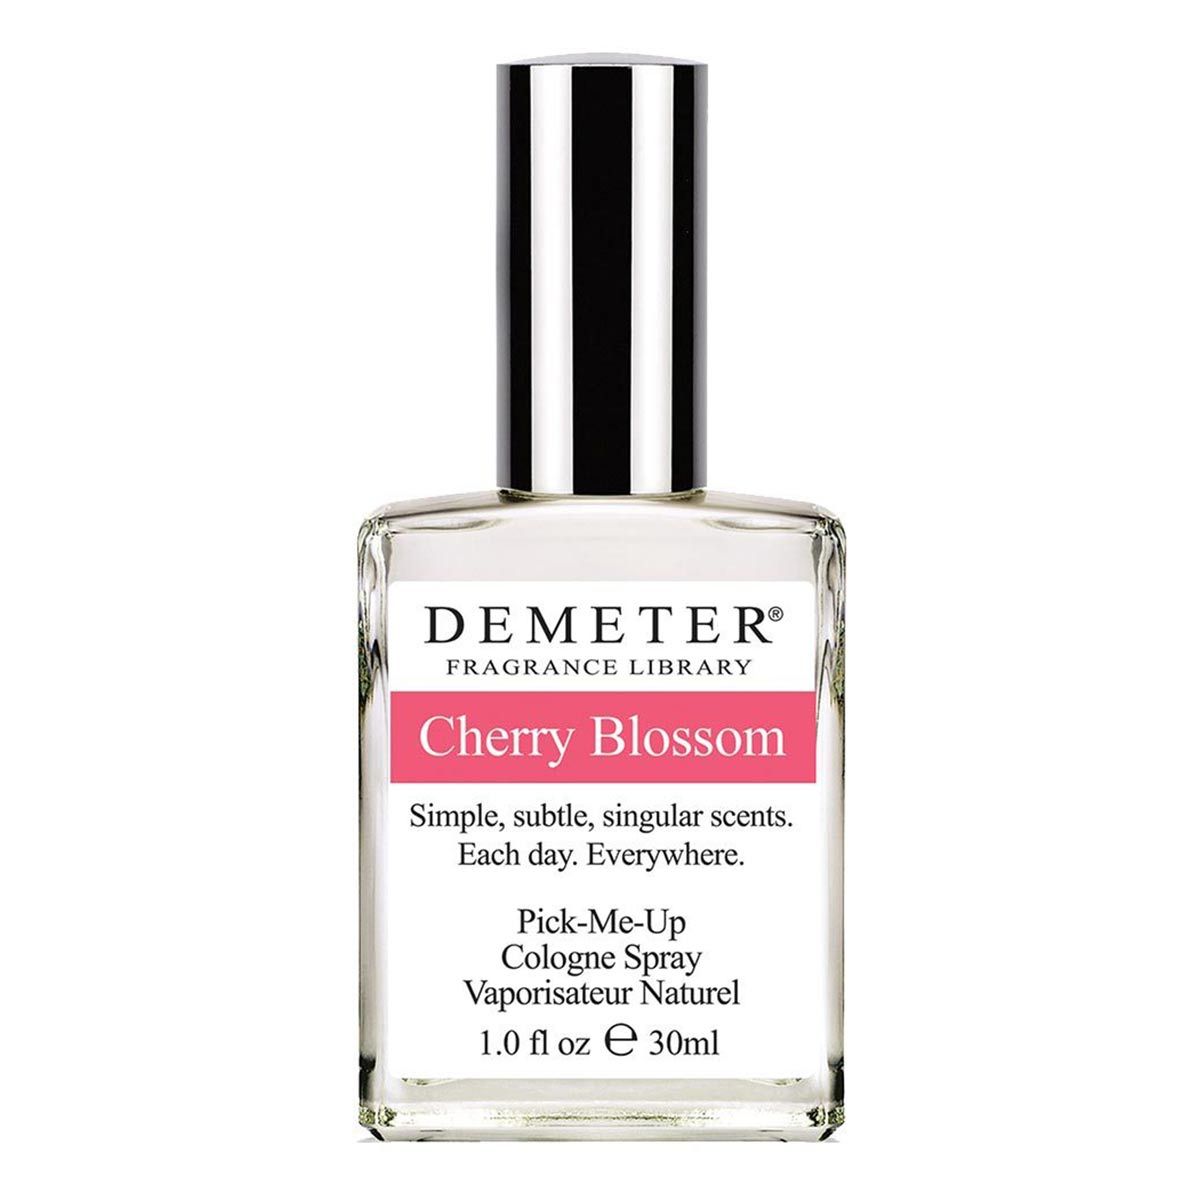 Primary image of Cherry Blossom Cologne